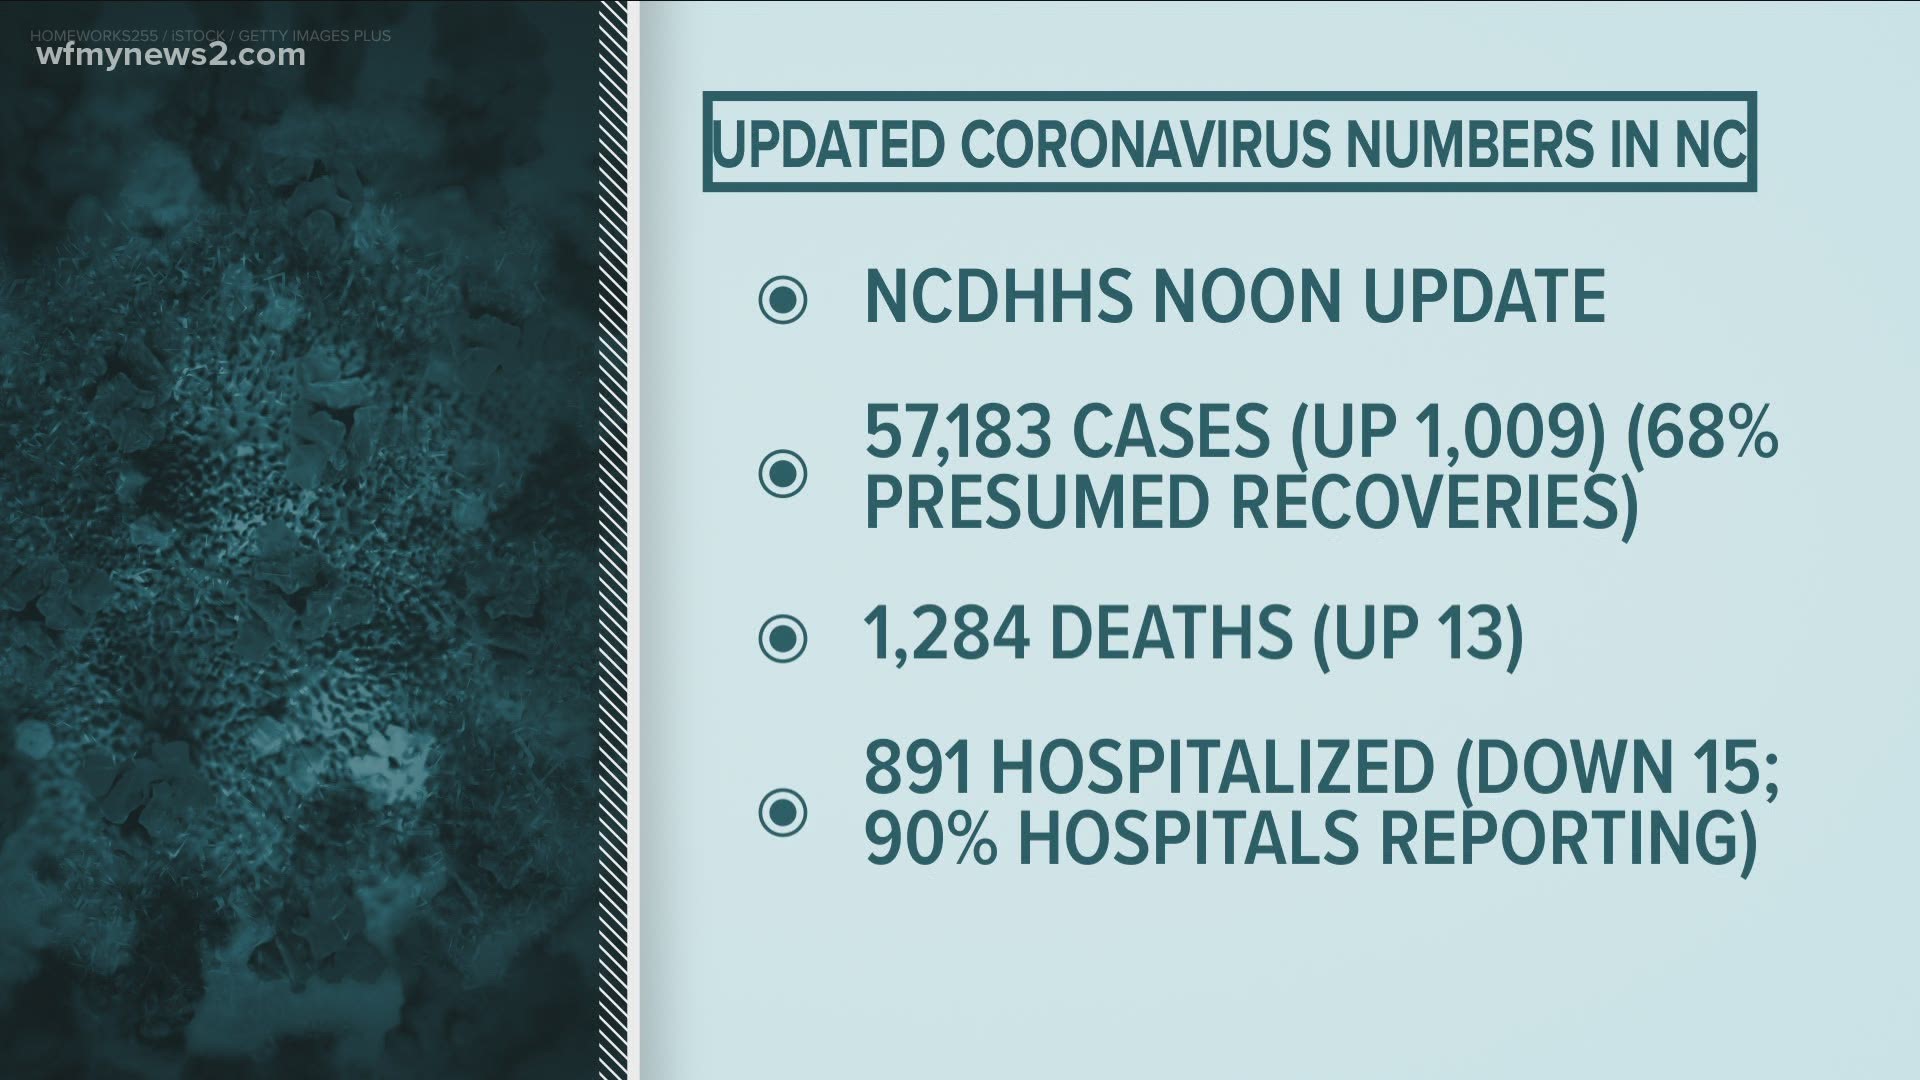 On June 25, the NCDHHS reported more than 1,000 new cases but declining hospitalizations.